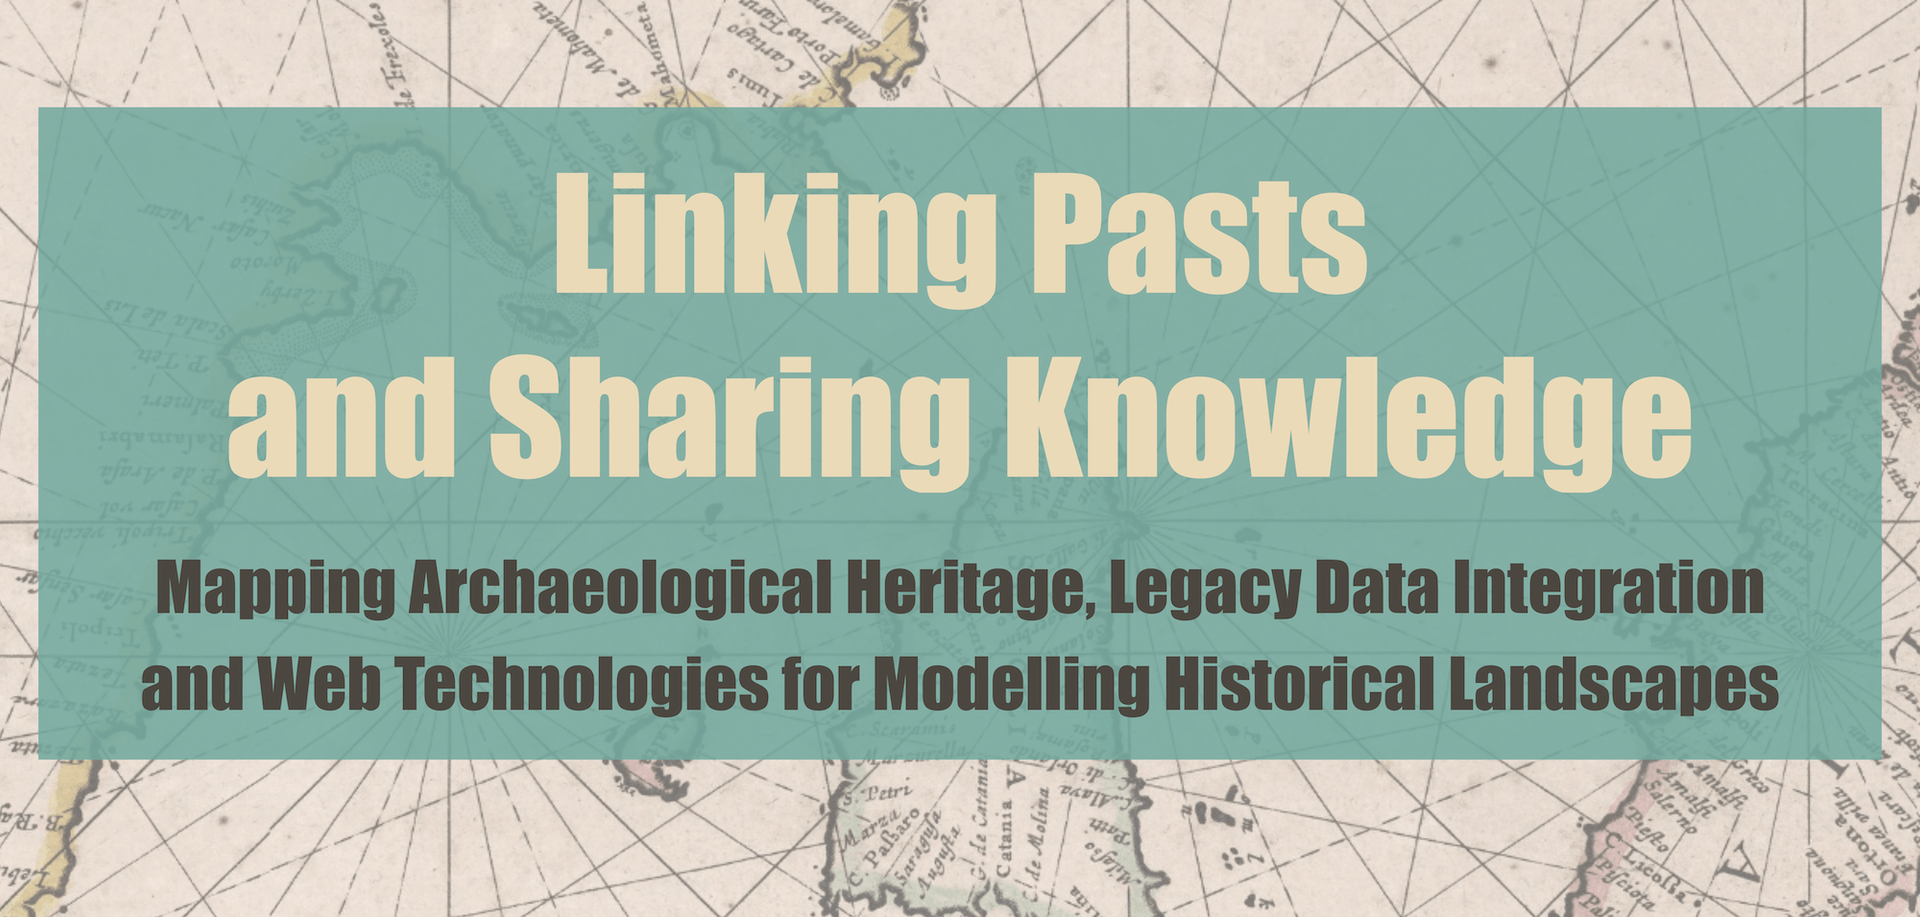 Linking Pasts And Sharing Knowledge. Mapping Archaeological Heritage, Legacy Data Integration and Web Technologies for Modelling Historical Landscapes